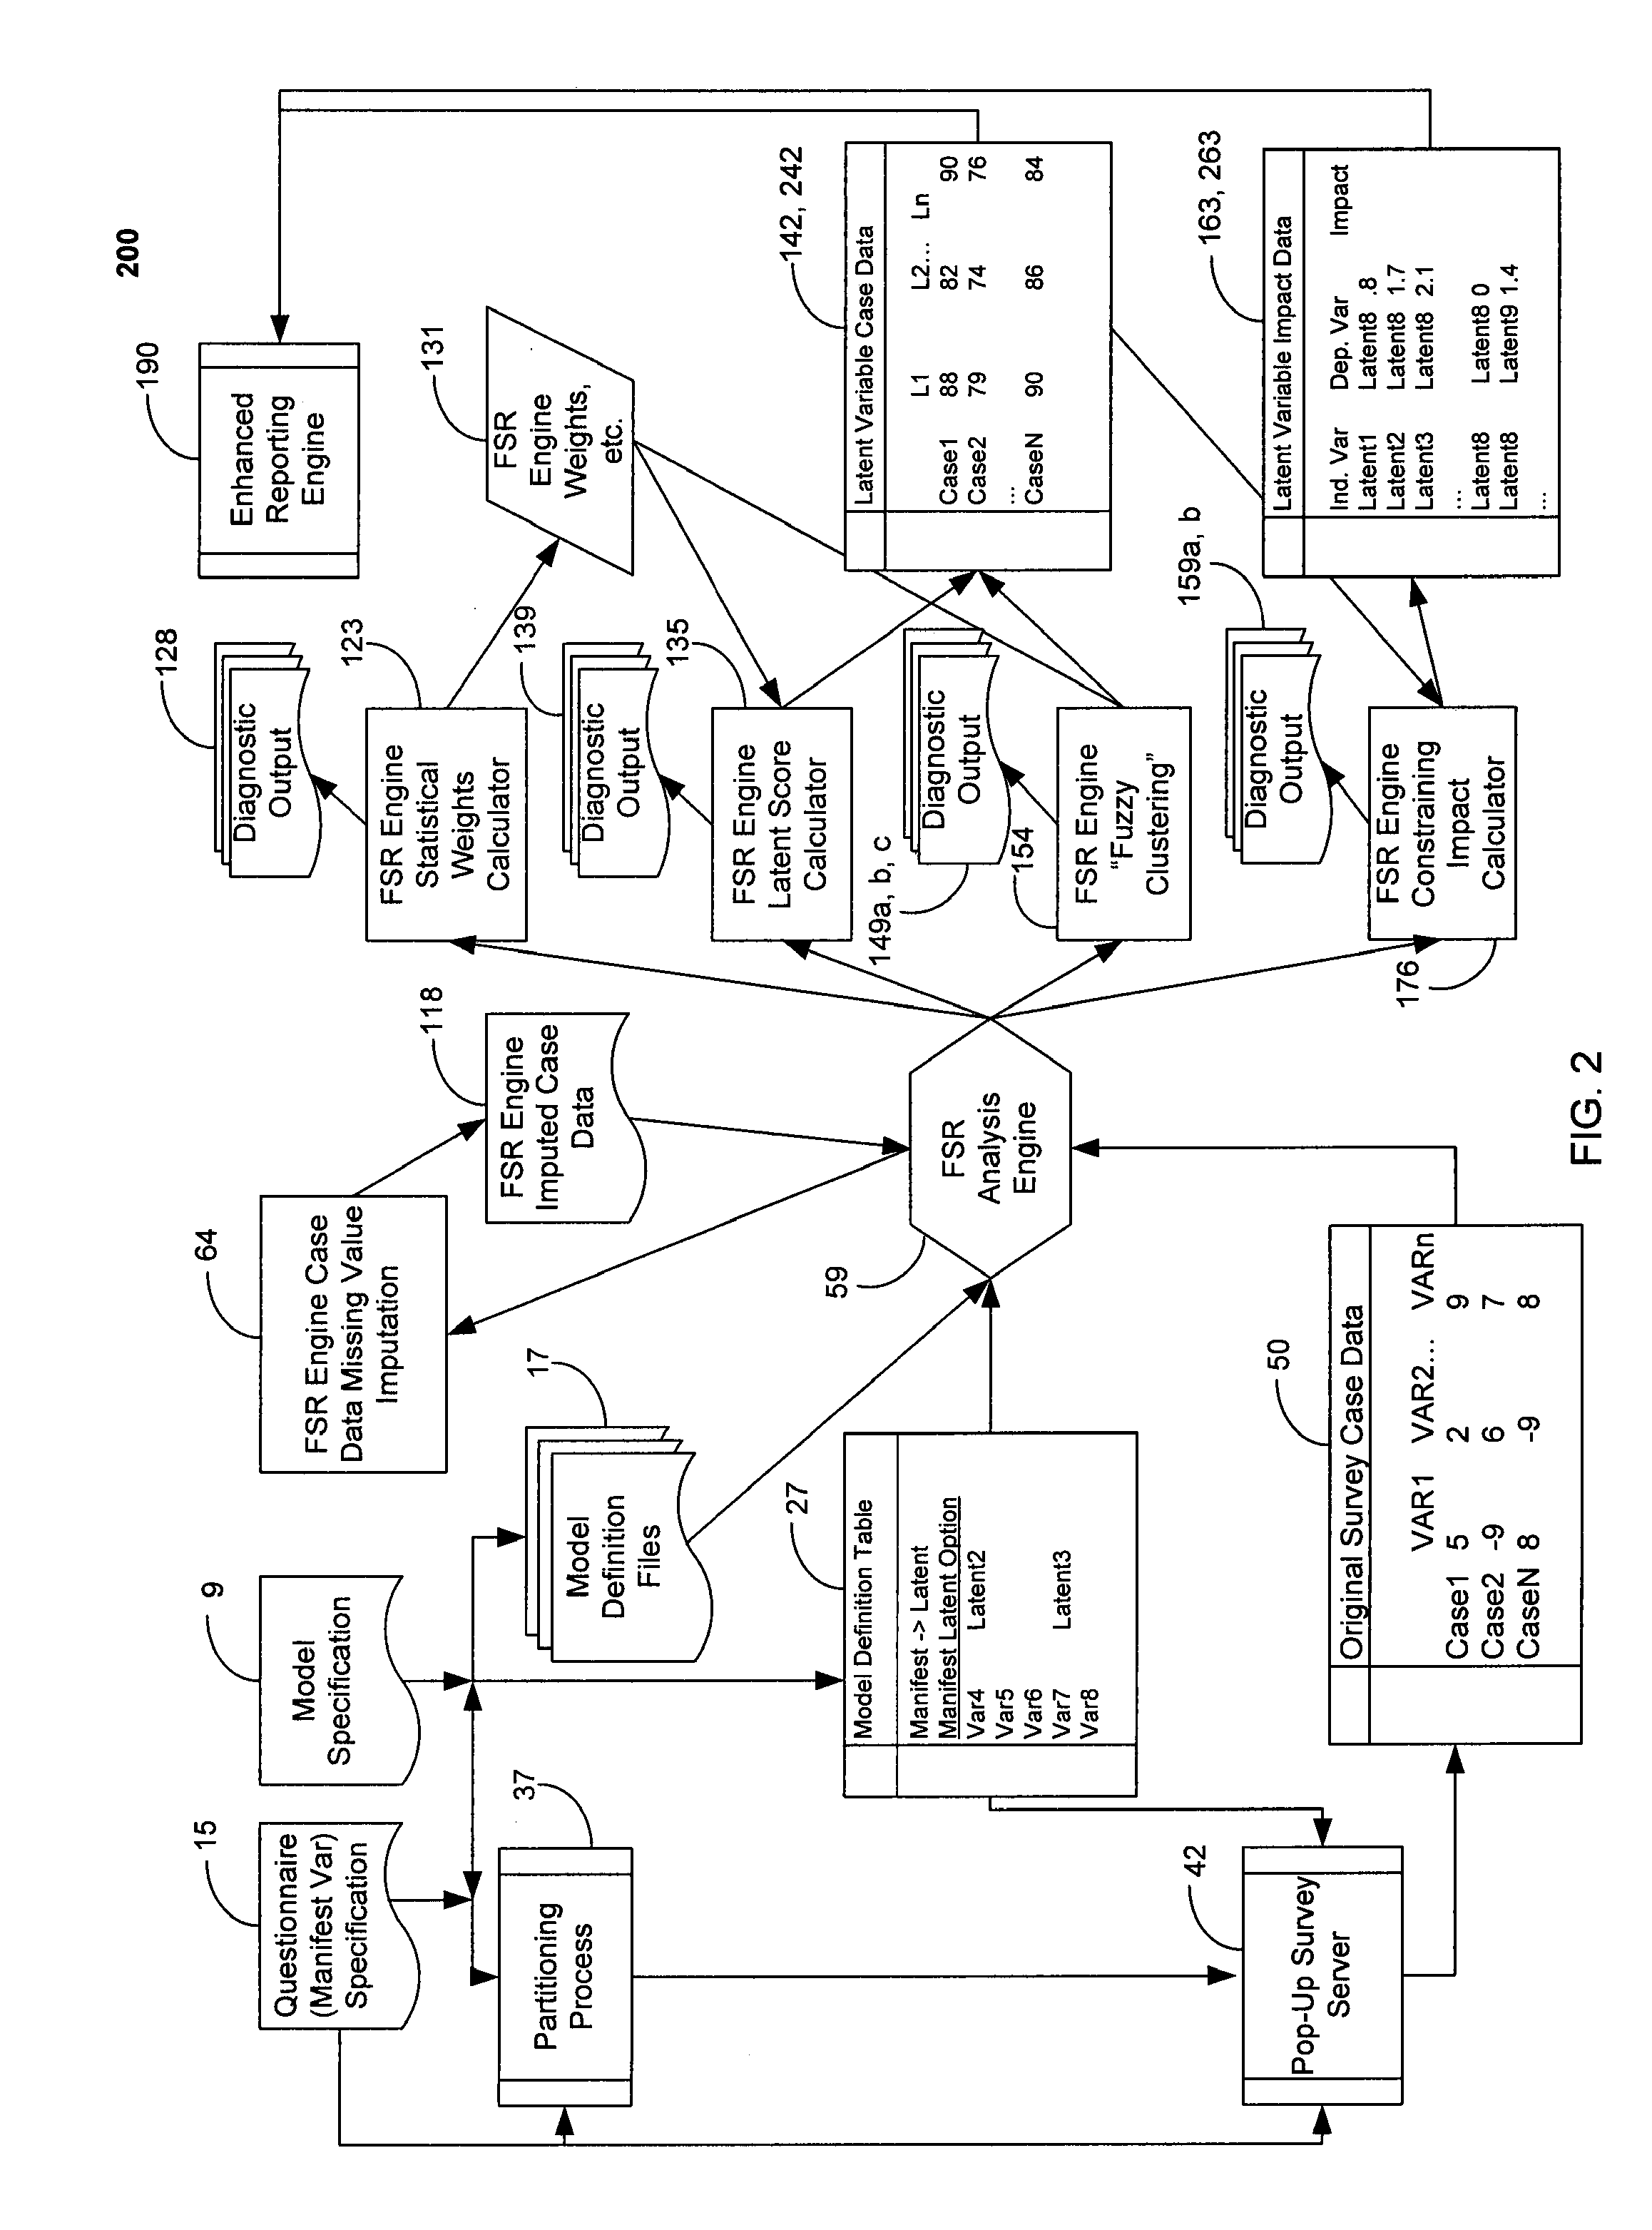 Systems and Methods for Impact Analysis in a Computer Network